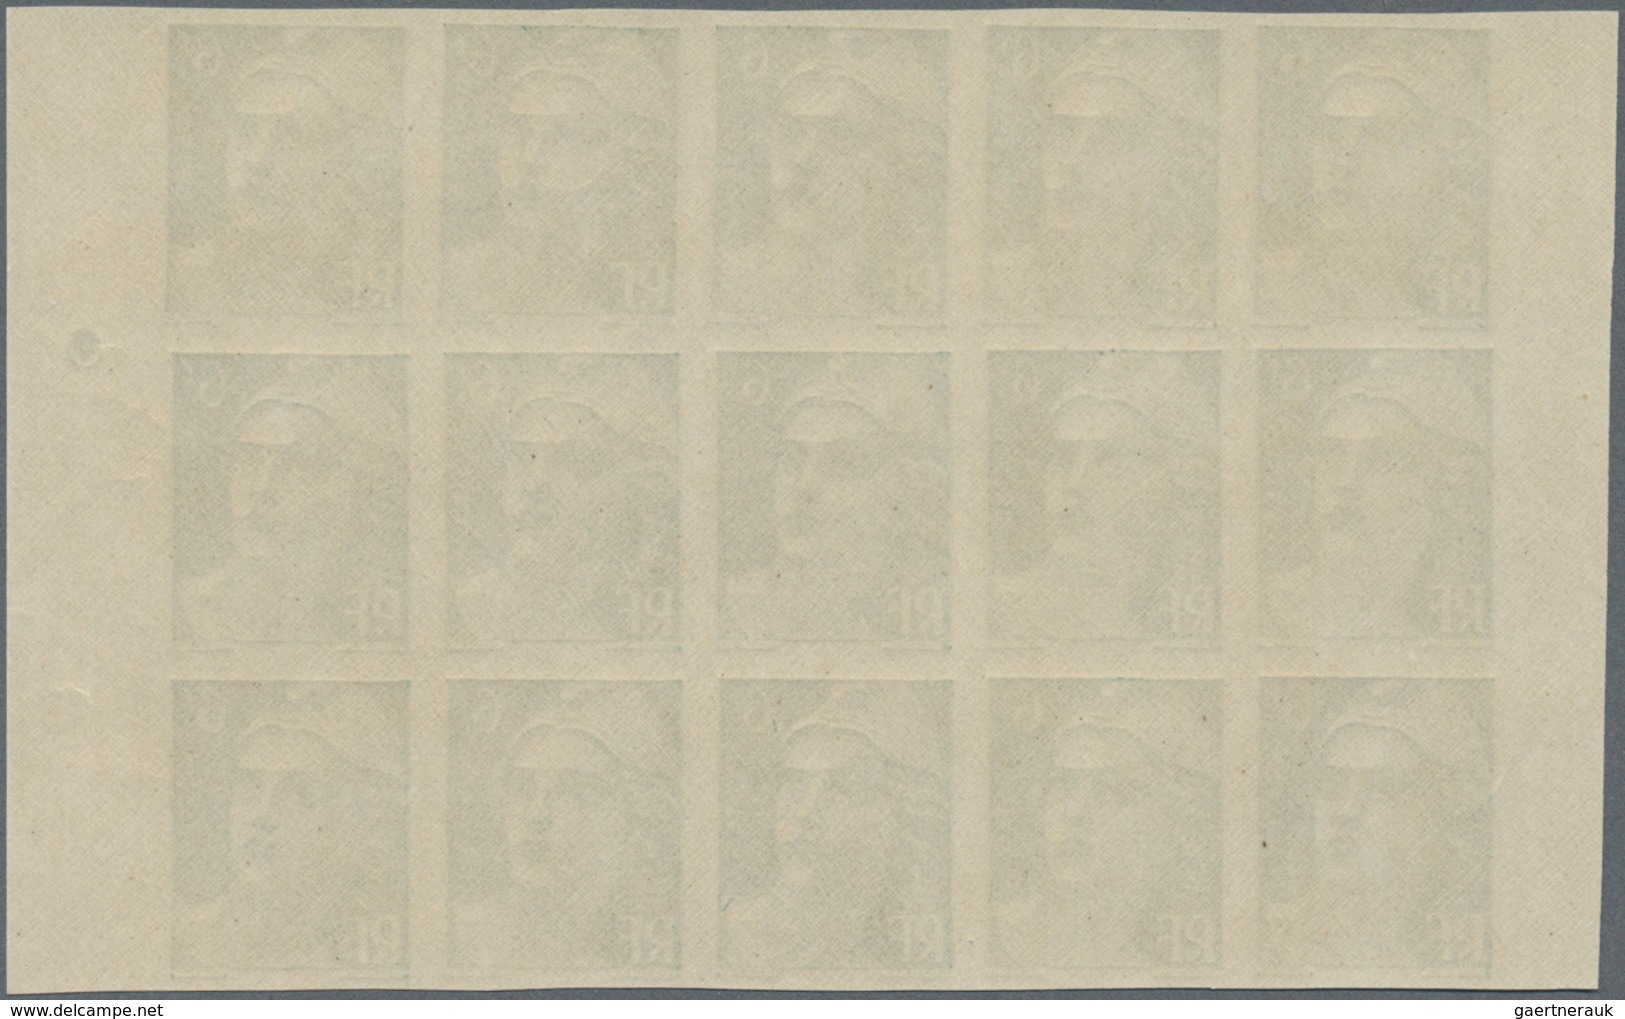 Frankreich: 1951, definitive issue Marianne (Gandon)‘ complete set of five in IMPERFORATE blocks of